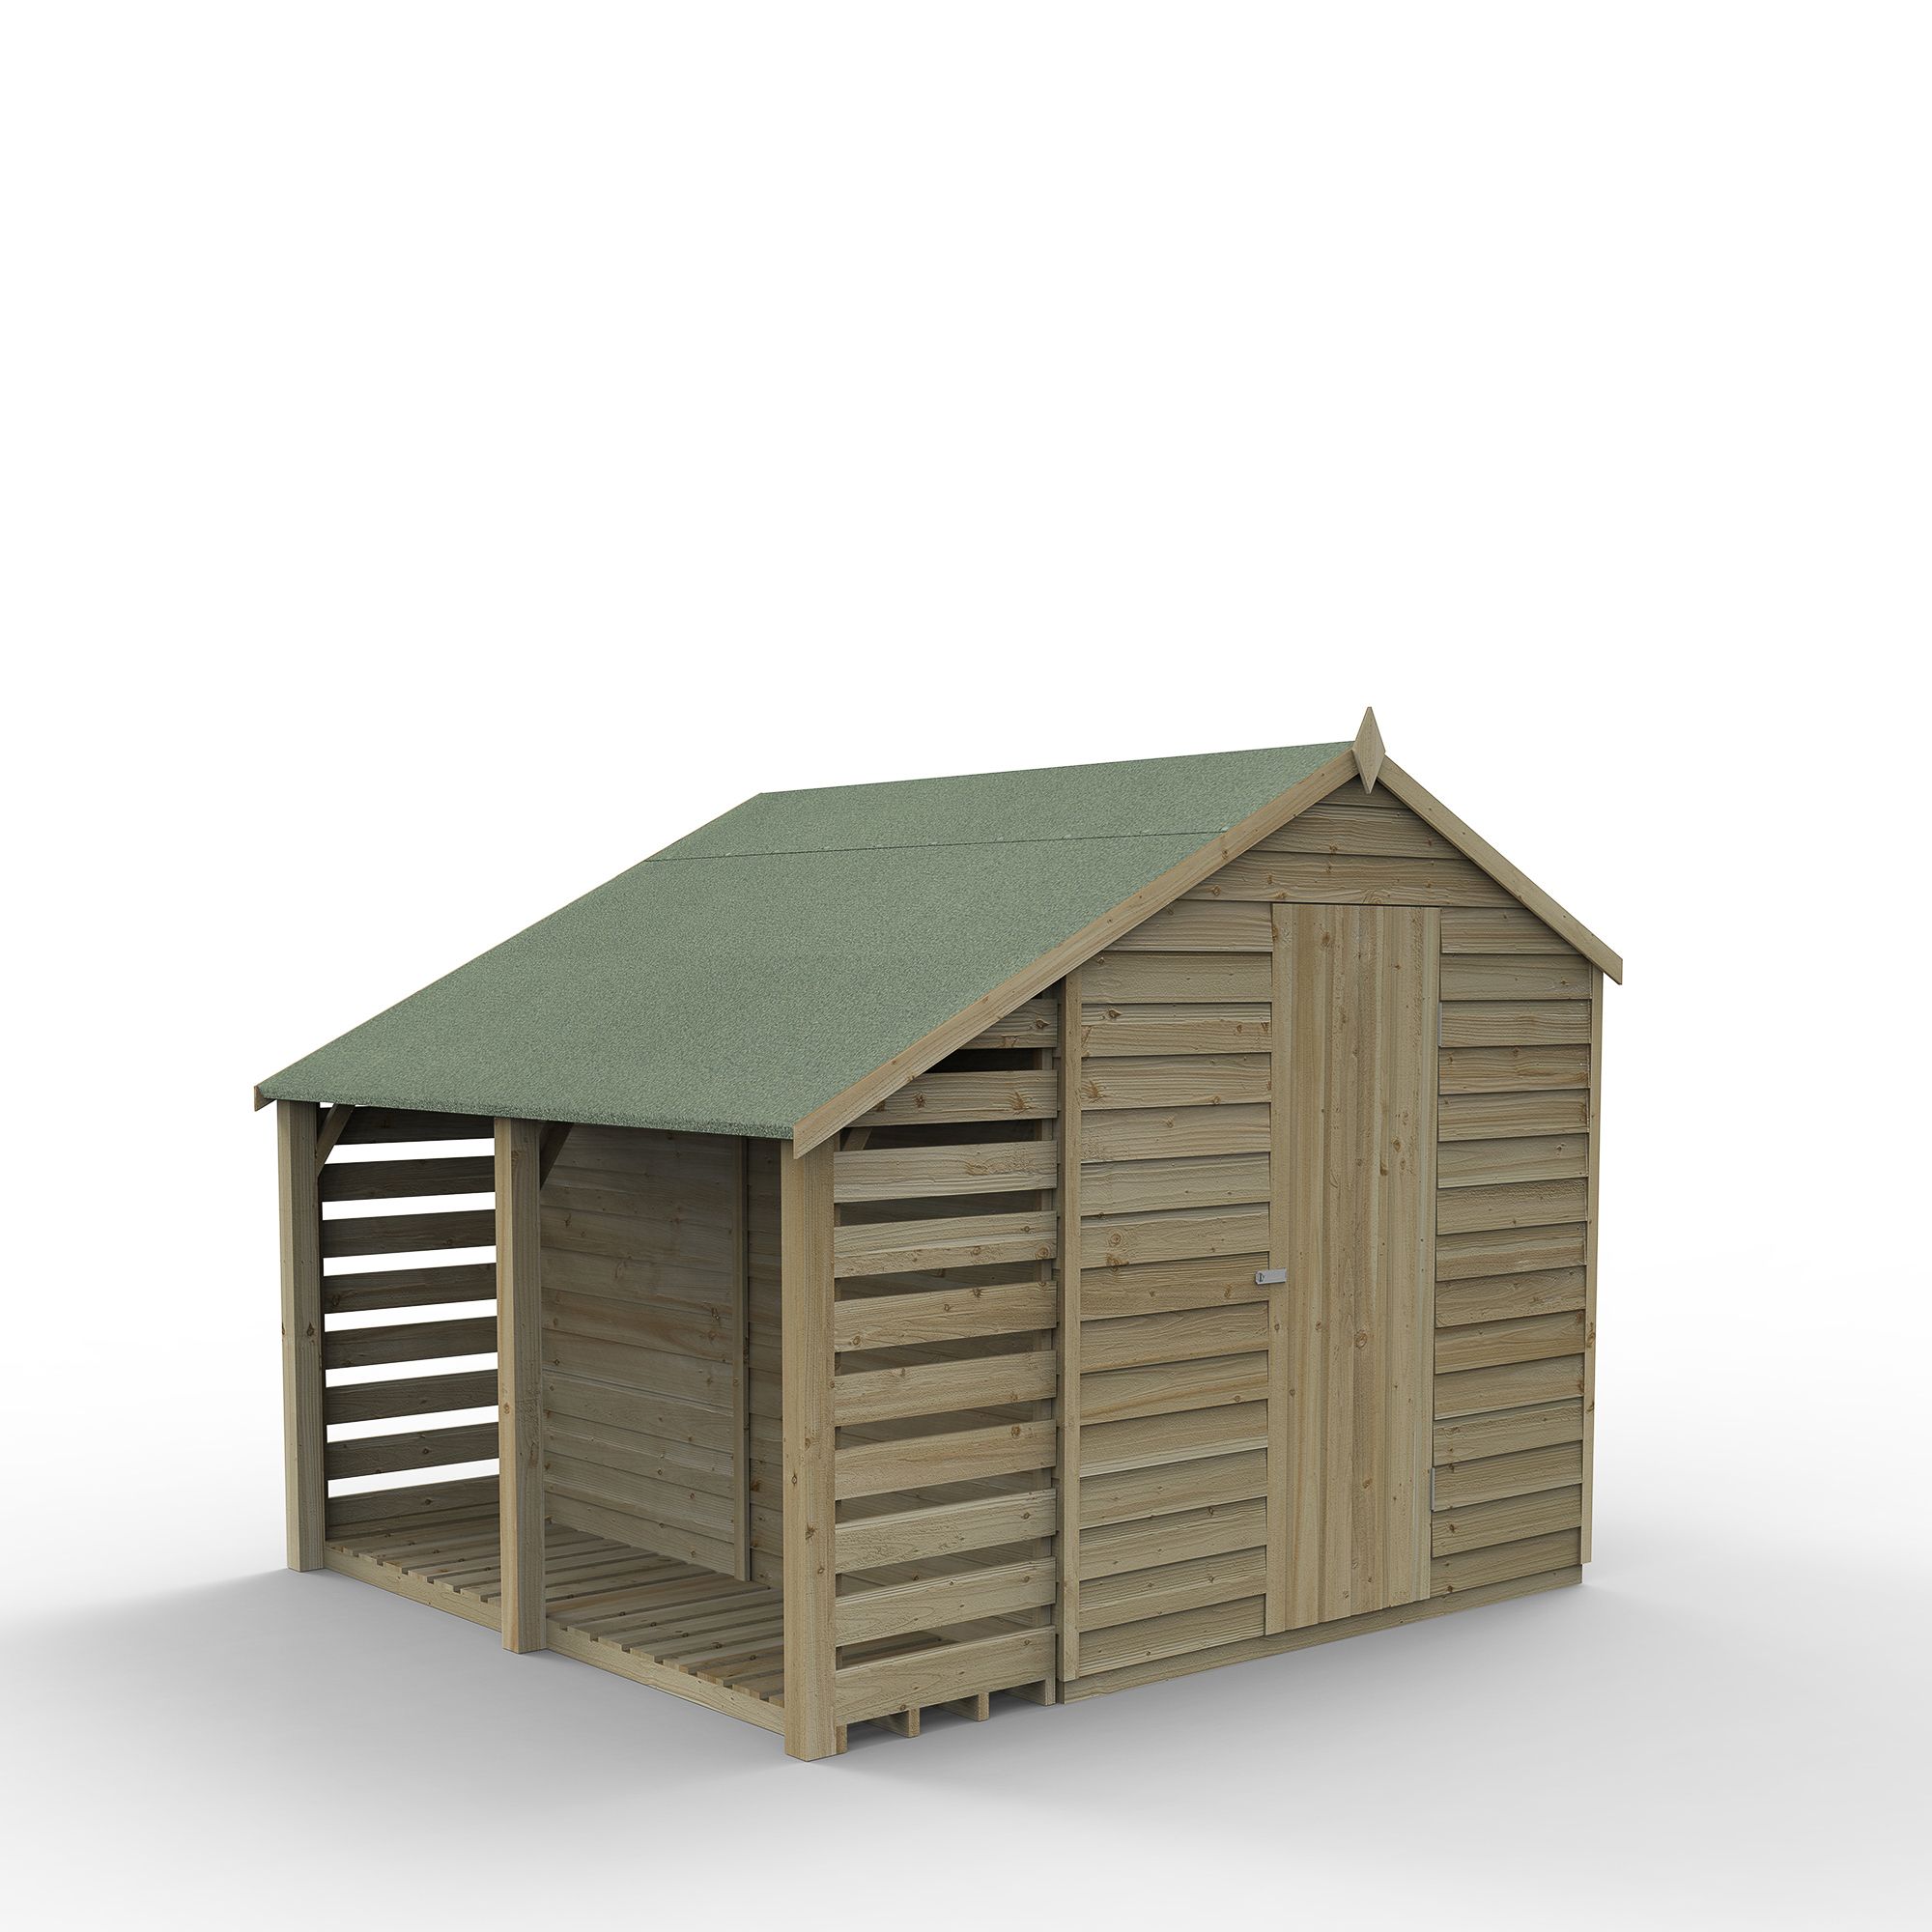 Forest Garden Shed Overlap 8x6 ft Apex Wooden Pressure treated Shed with floor & 2 windows